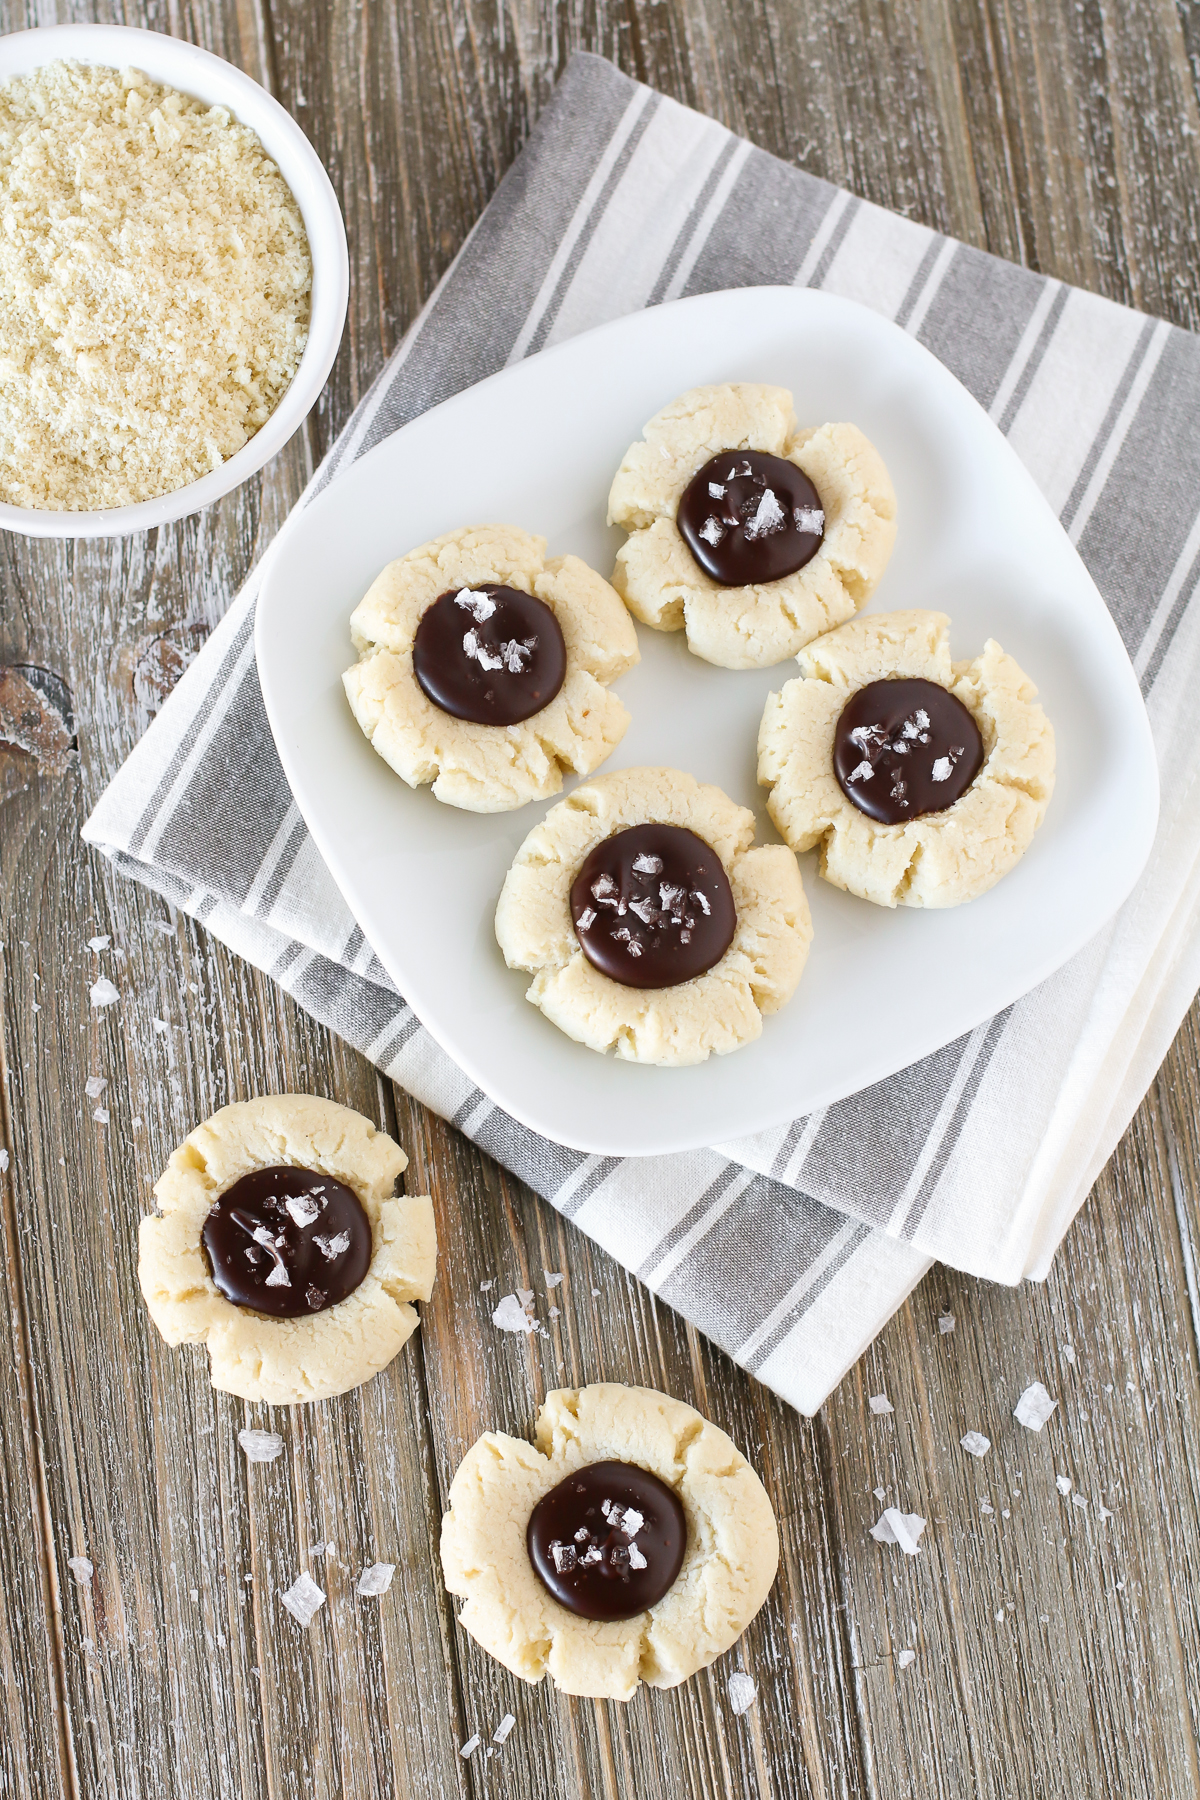 s. Soft almond thumbprint cookies, filled with a decadent chocolate ganache. Those sea salt flakes takes these cookies over the top!